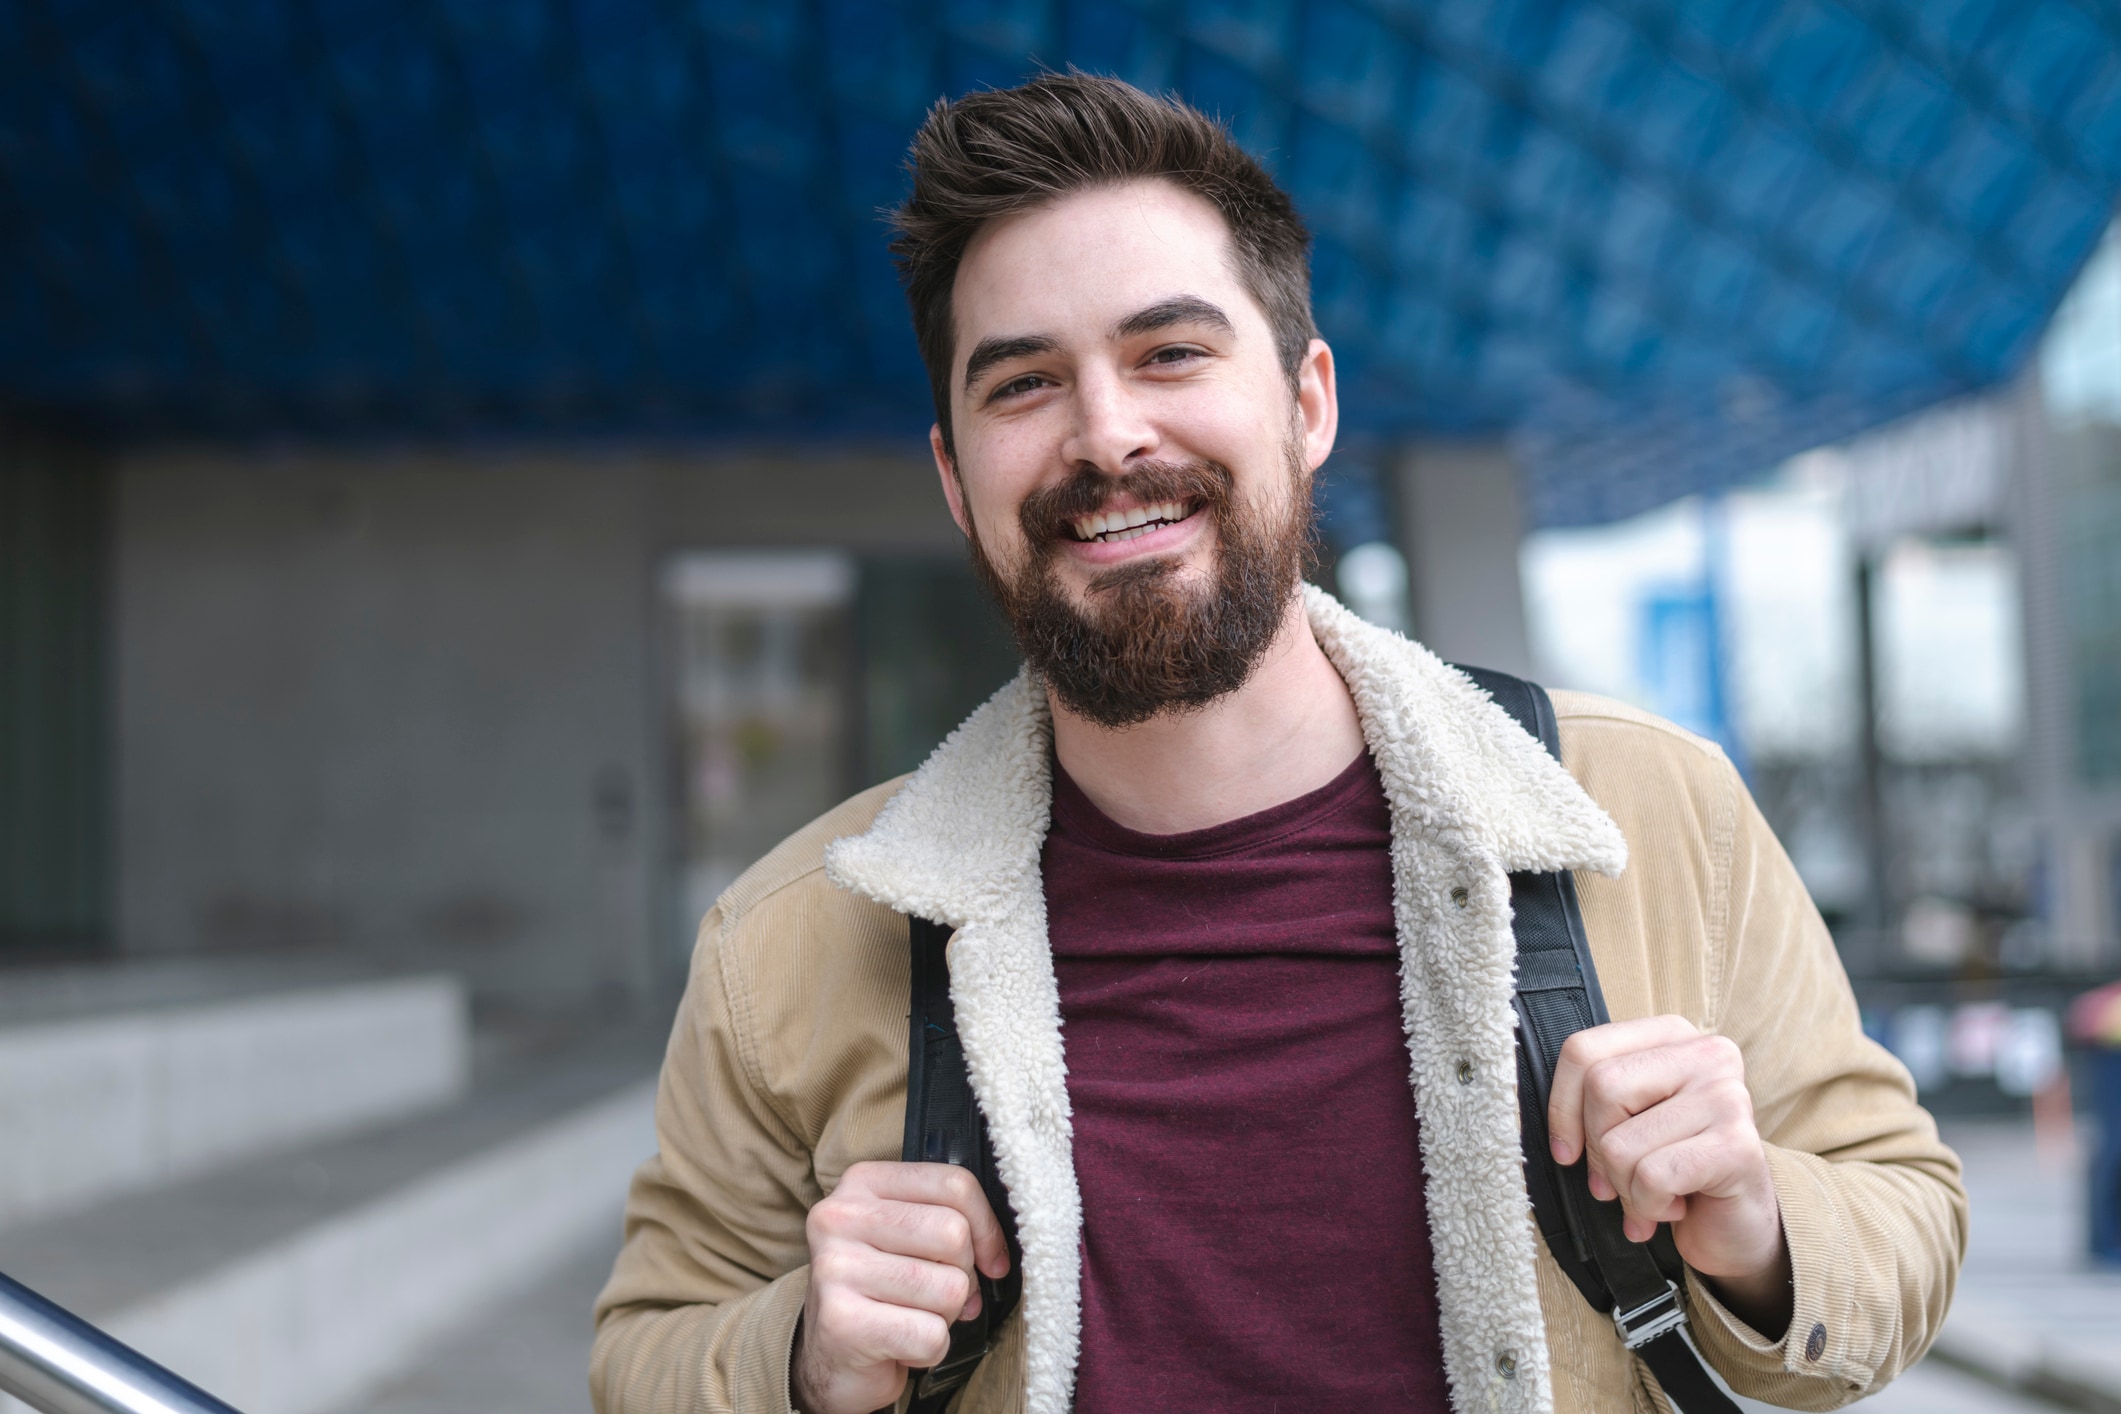 Man with a backpack on smiling 